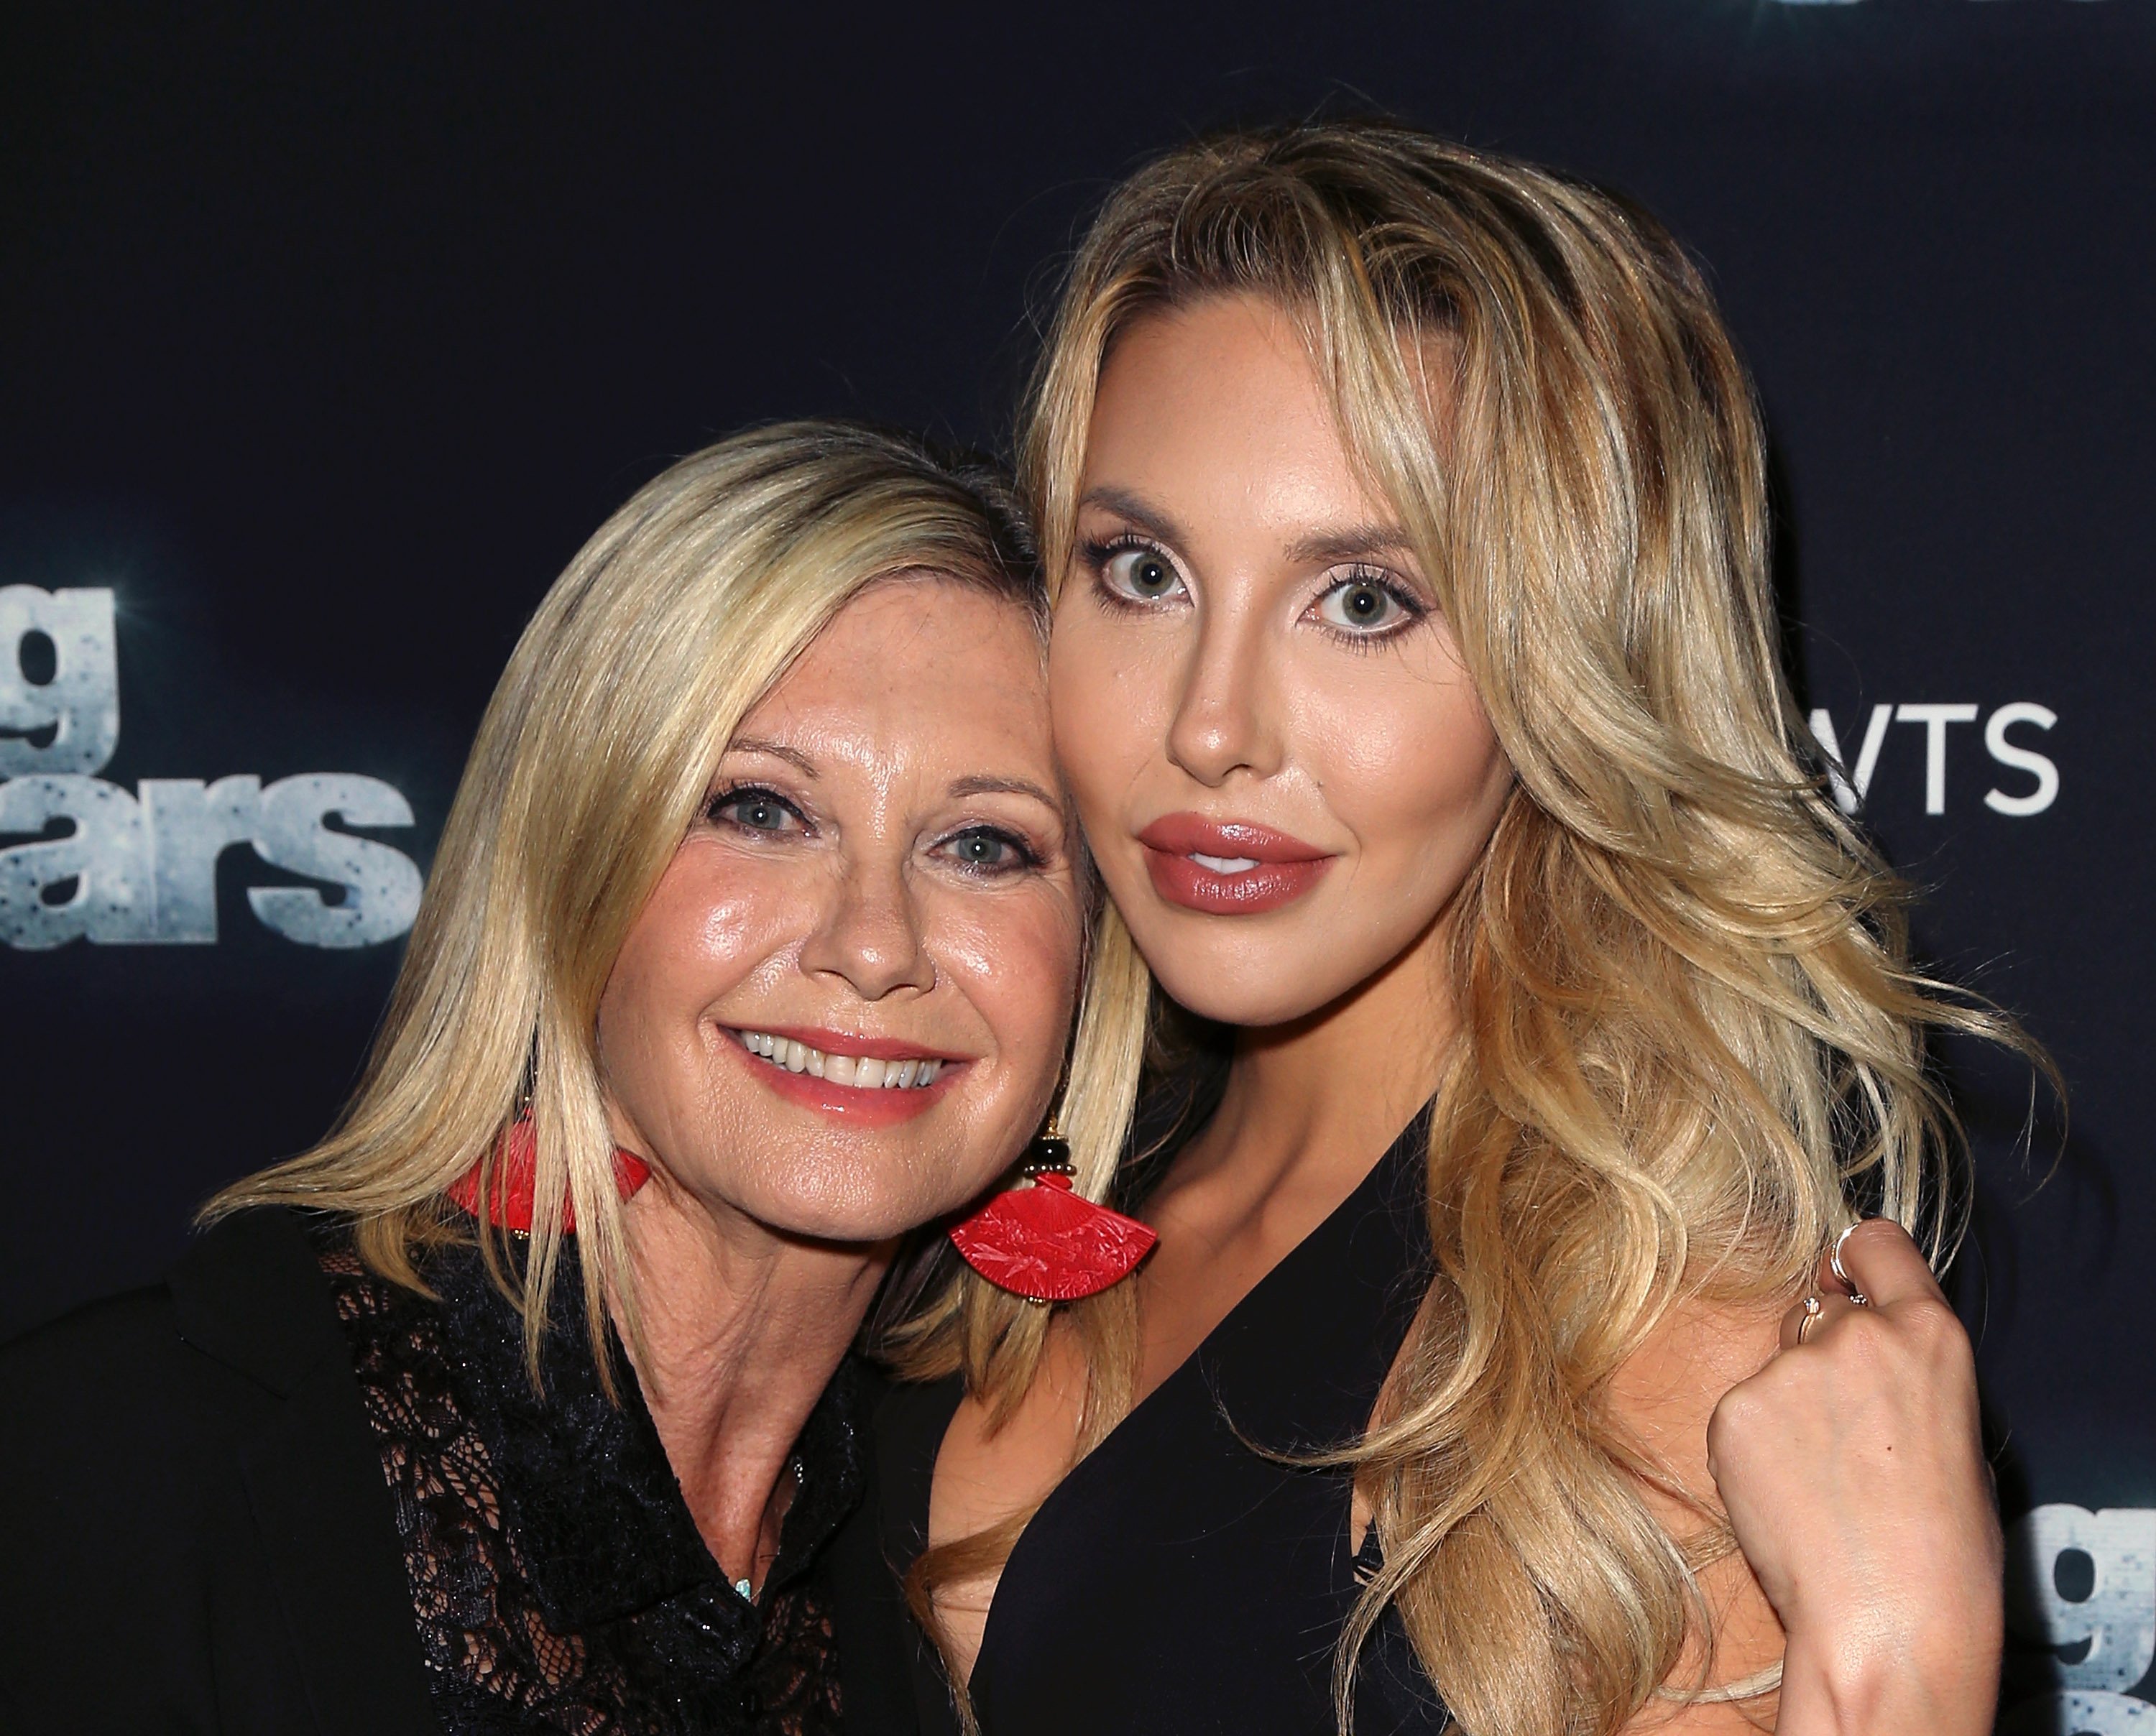 Olivia Newton-John and Chloe Lattanzi at the set of "Dancing with the Stars" Season 21 on October 19, 2015 | Source: Getty Images